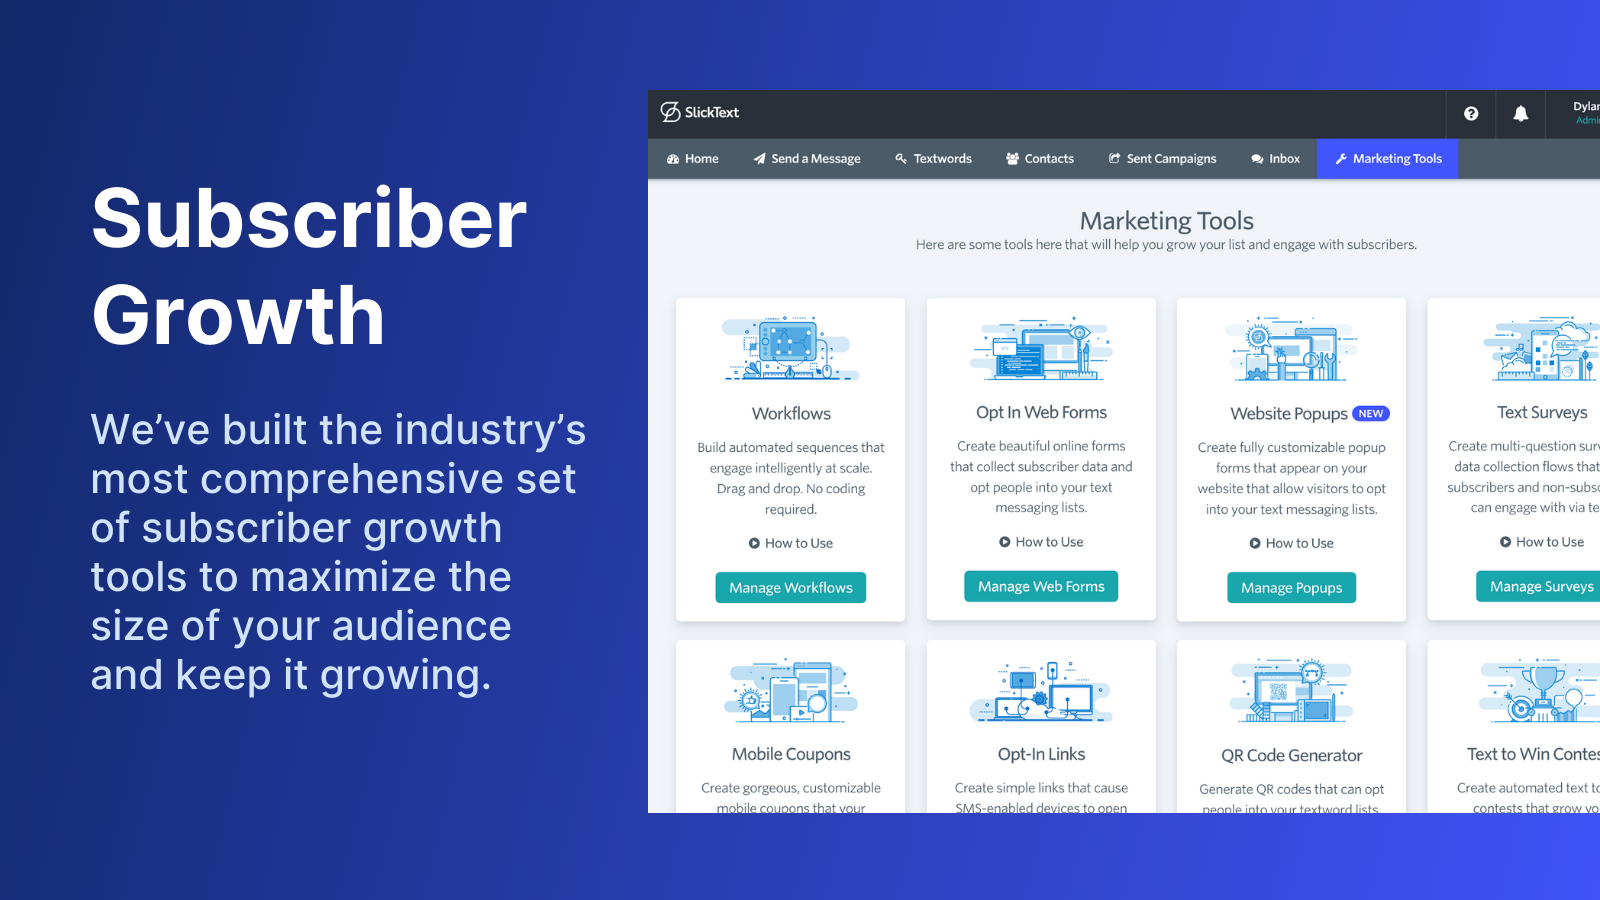 We've built the industry's most comprehensive set of subscriber growth tools to maximize the size of your audience and keep it growing.